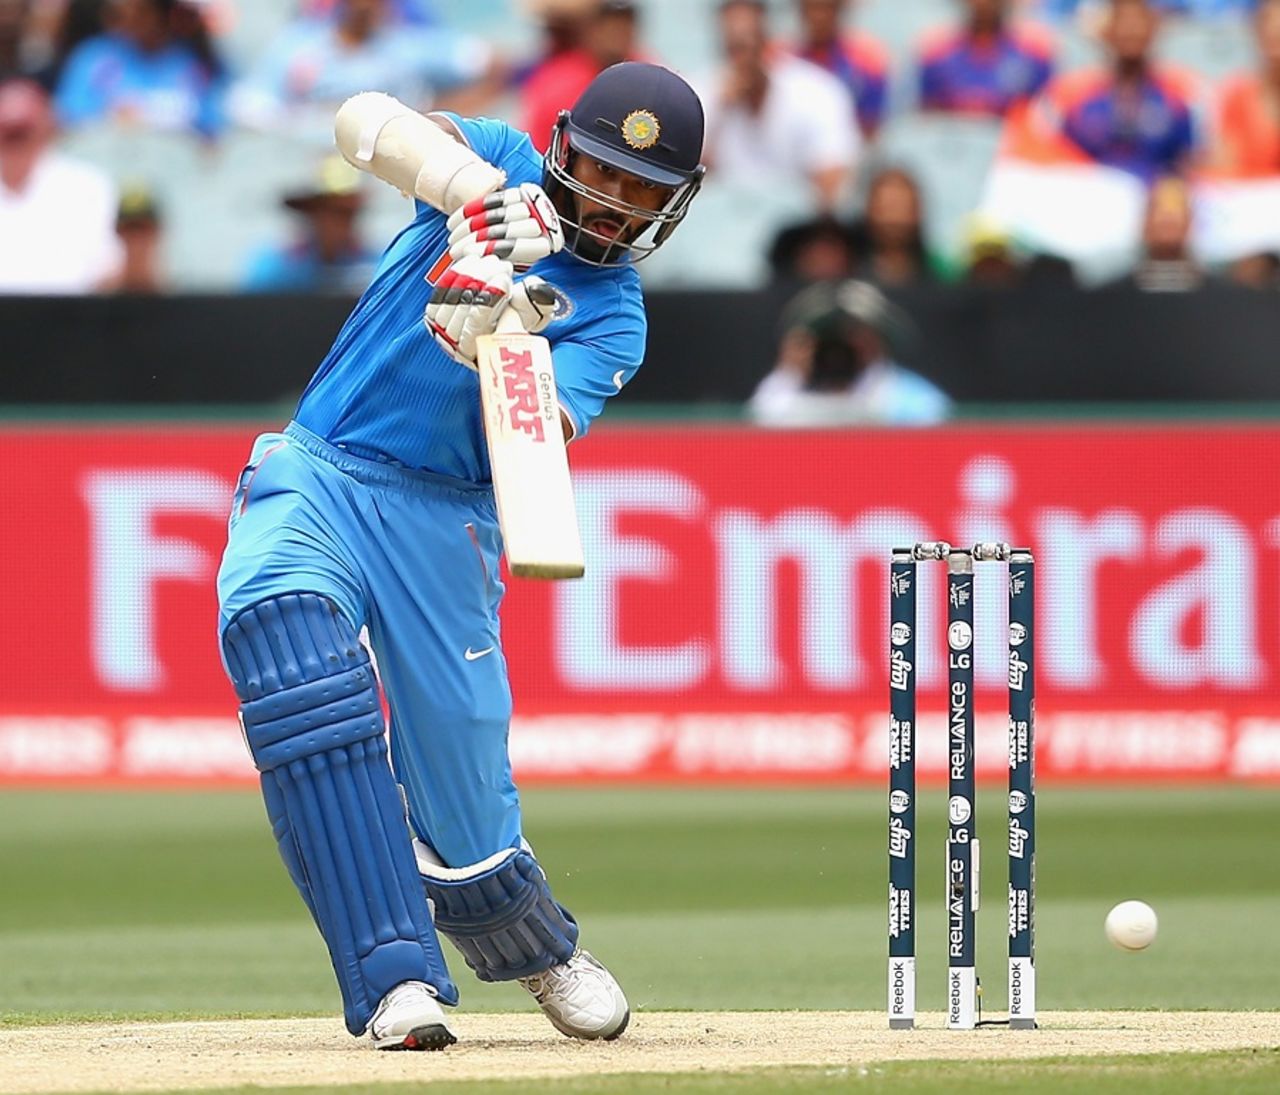 Shikhar Dhawan drives the ball through the off side, India v South Africa, World Cup 2015, Group B, Melbourne, February 22, 2015